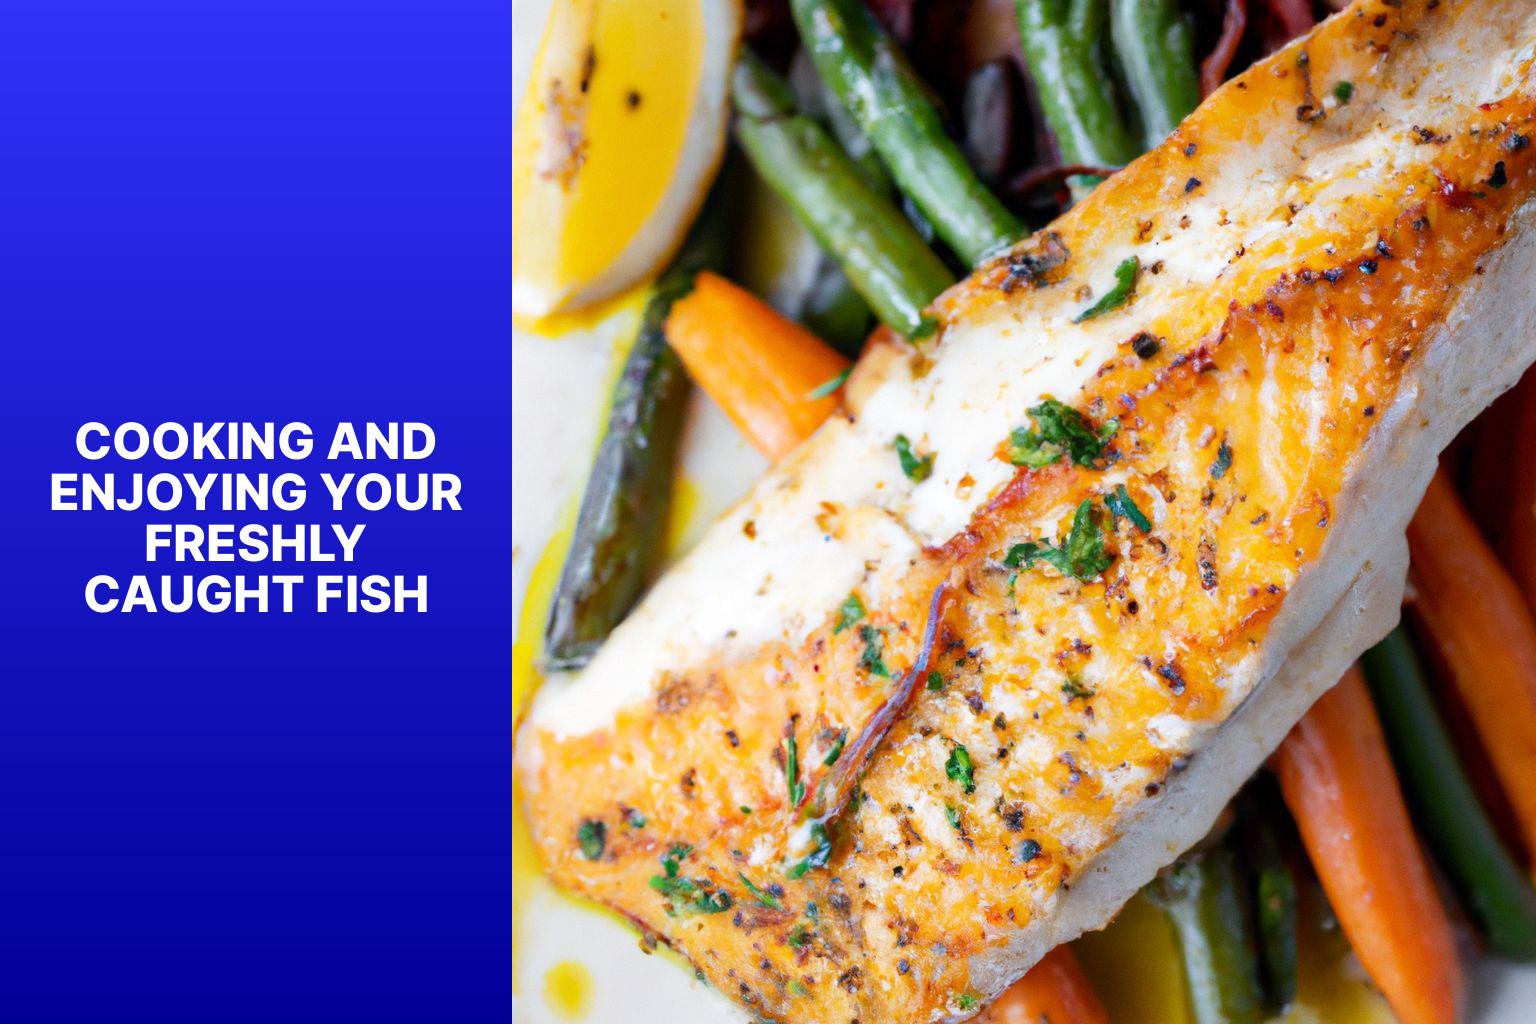 Cooking and Enjoying Your Freshly Caught Fish - Fishing and Feasting: Preparing Your Catch of the Day 